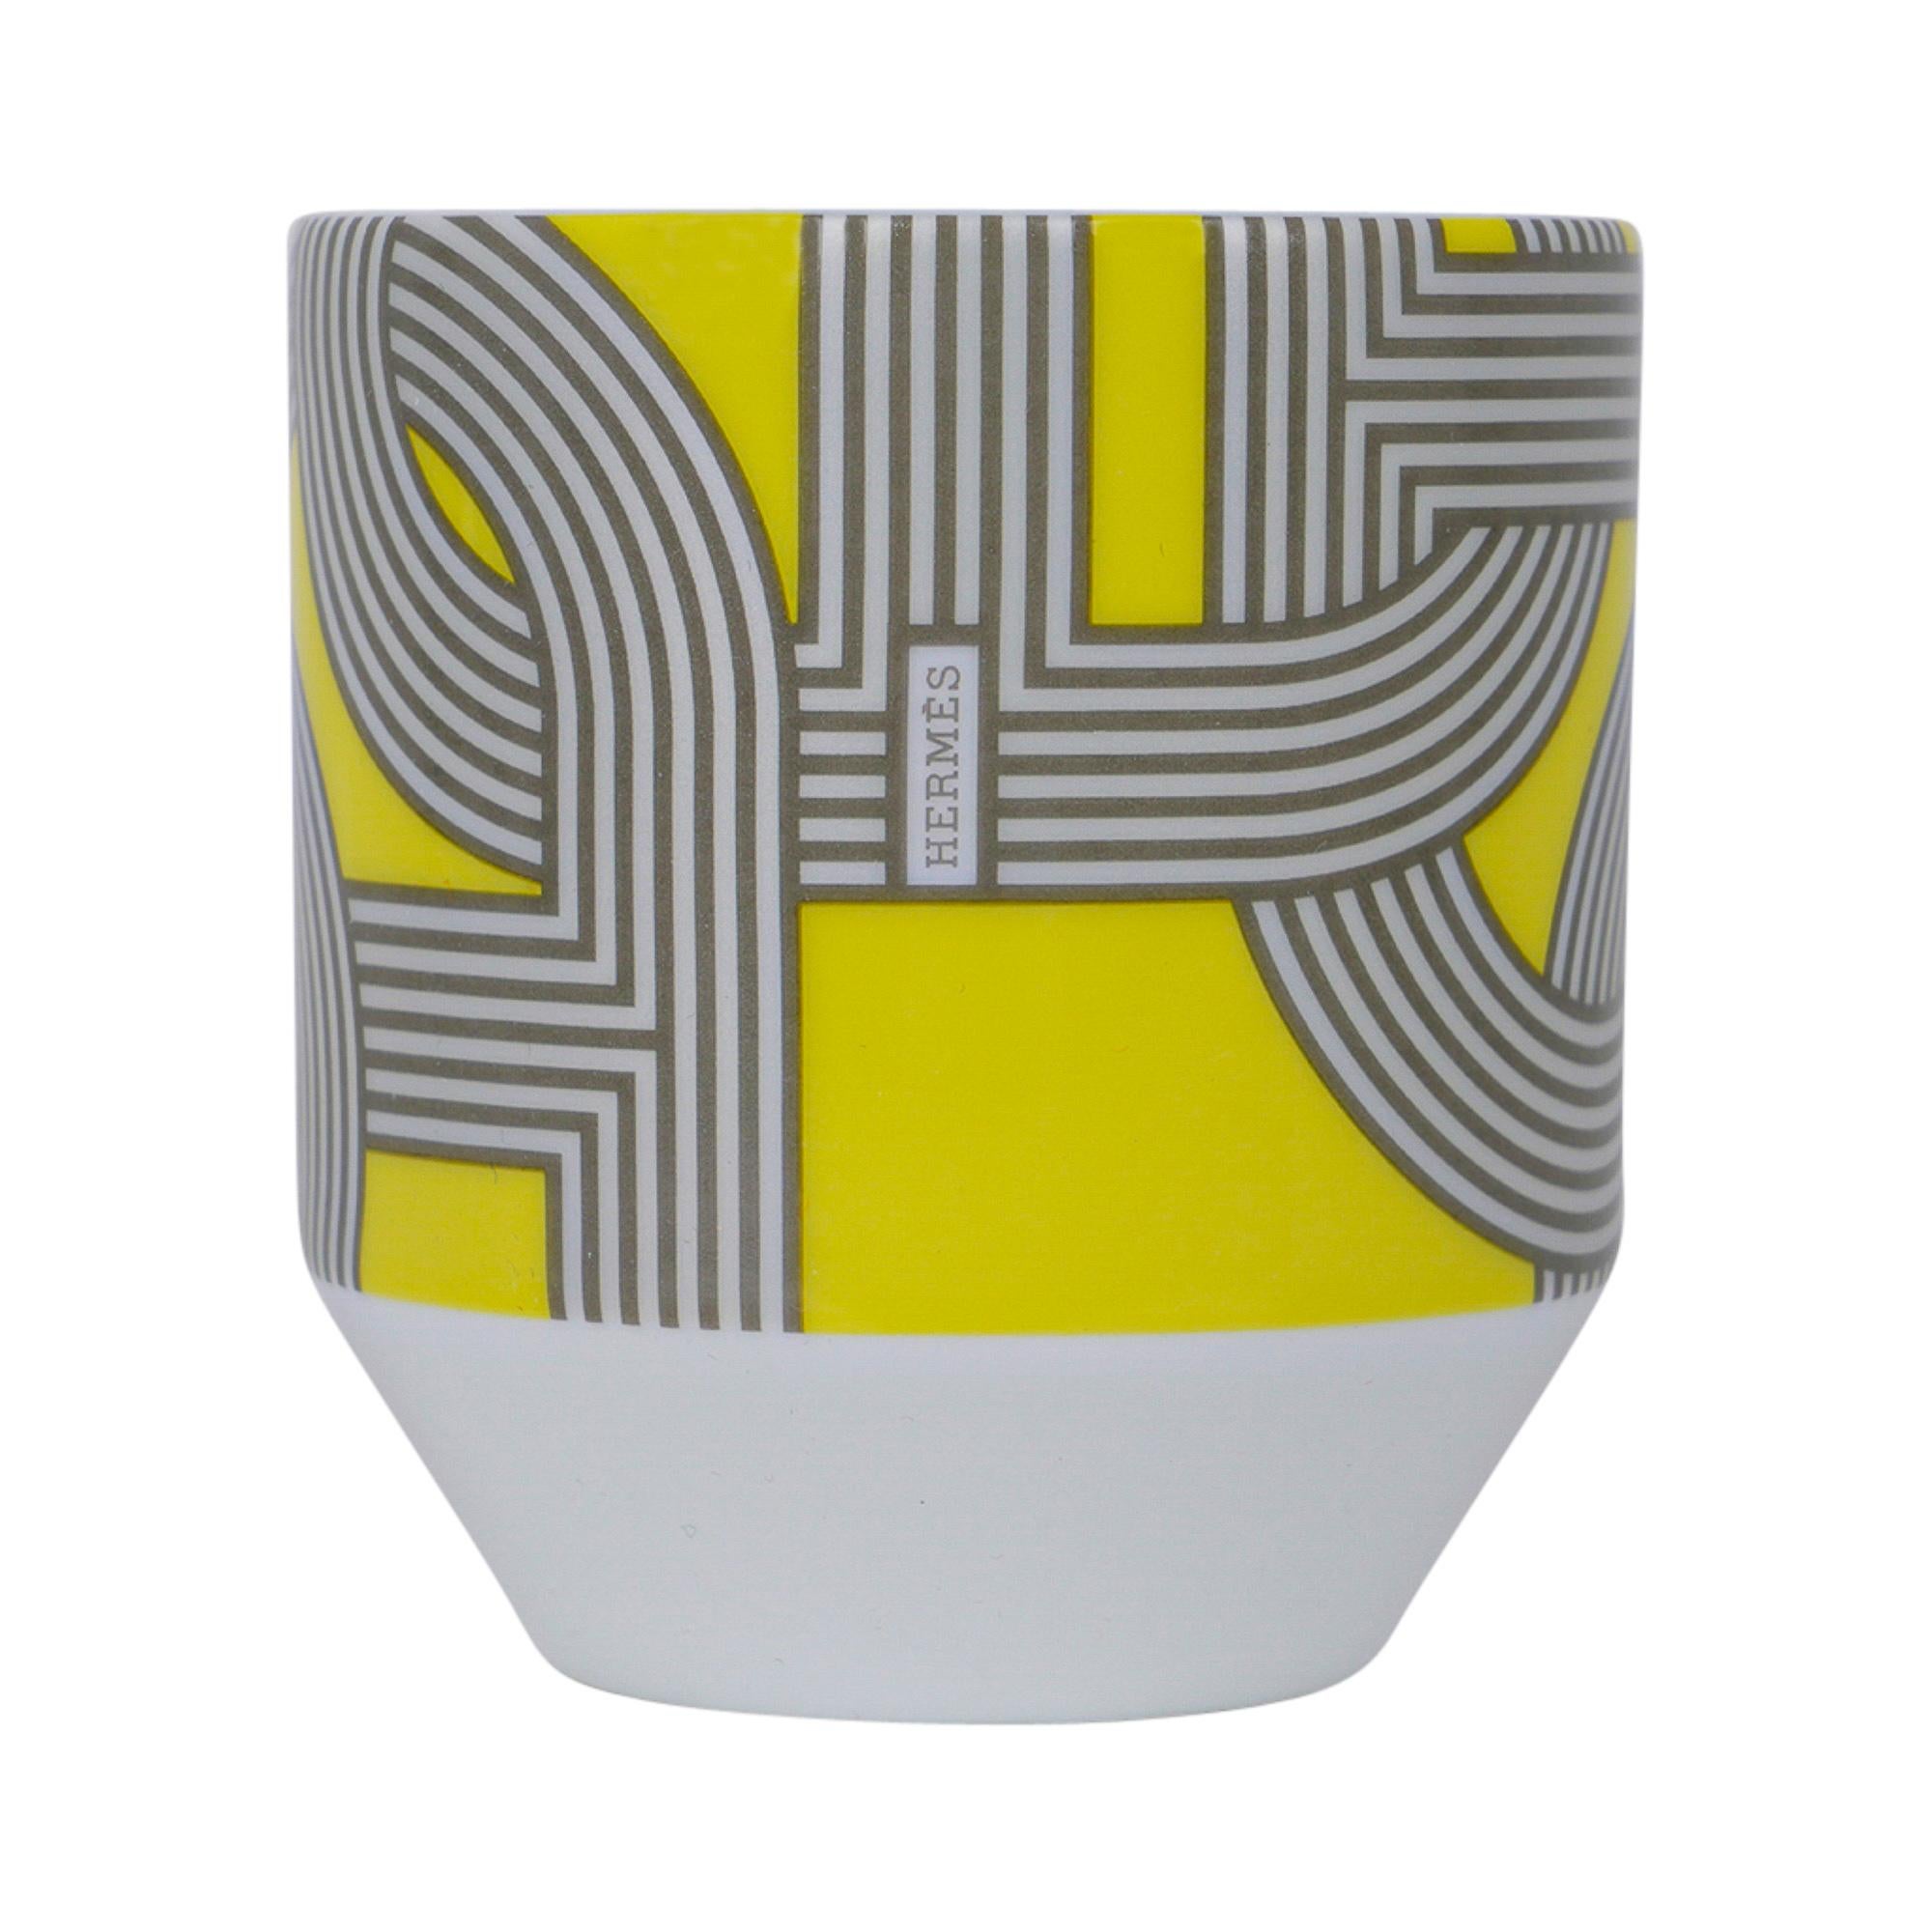 Guaranteed authentic Hermes Rallye 24 Tumblers Limoge Porcelain set of 6.
This beautiful and colorful porcelain Hermes tea set creates a perfect setting for any table.
Design inspired by the Chaine d'ancre here it changes into a racetrack with